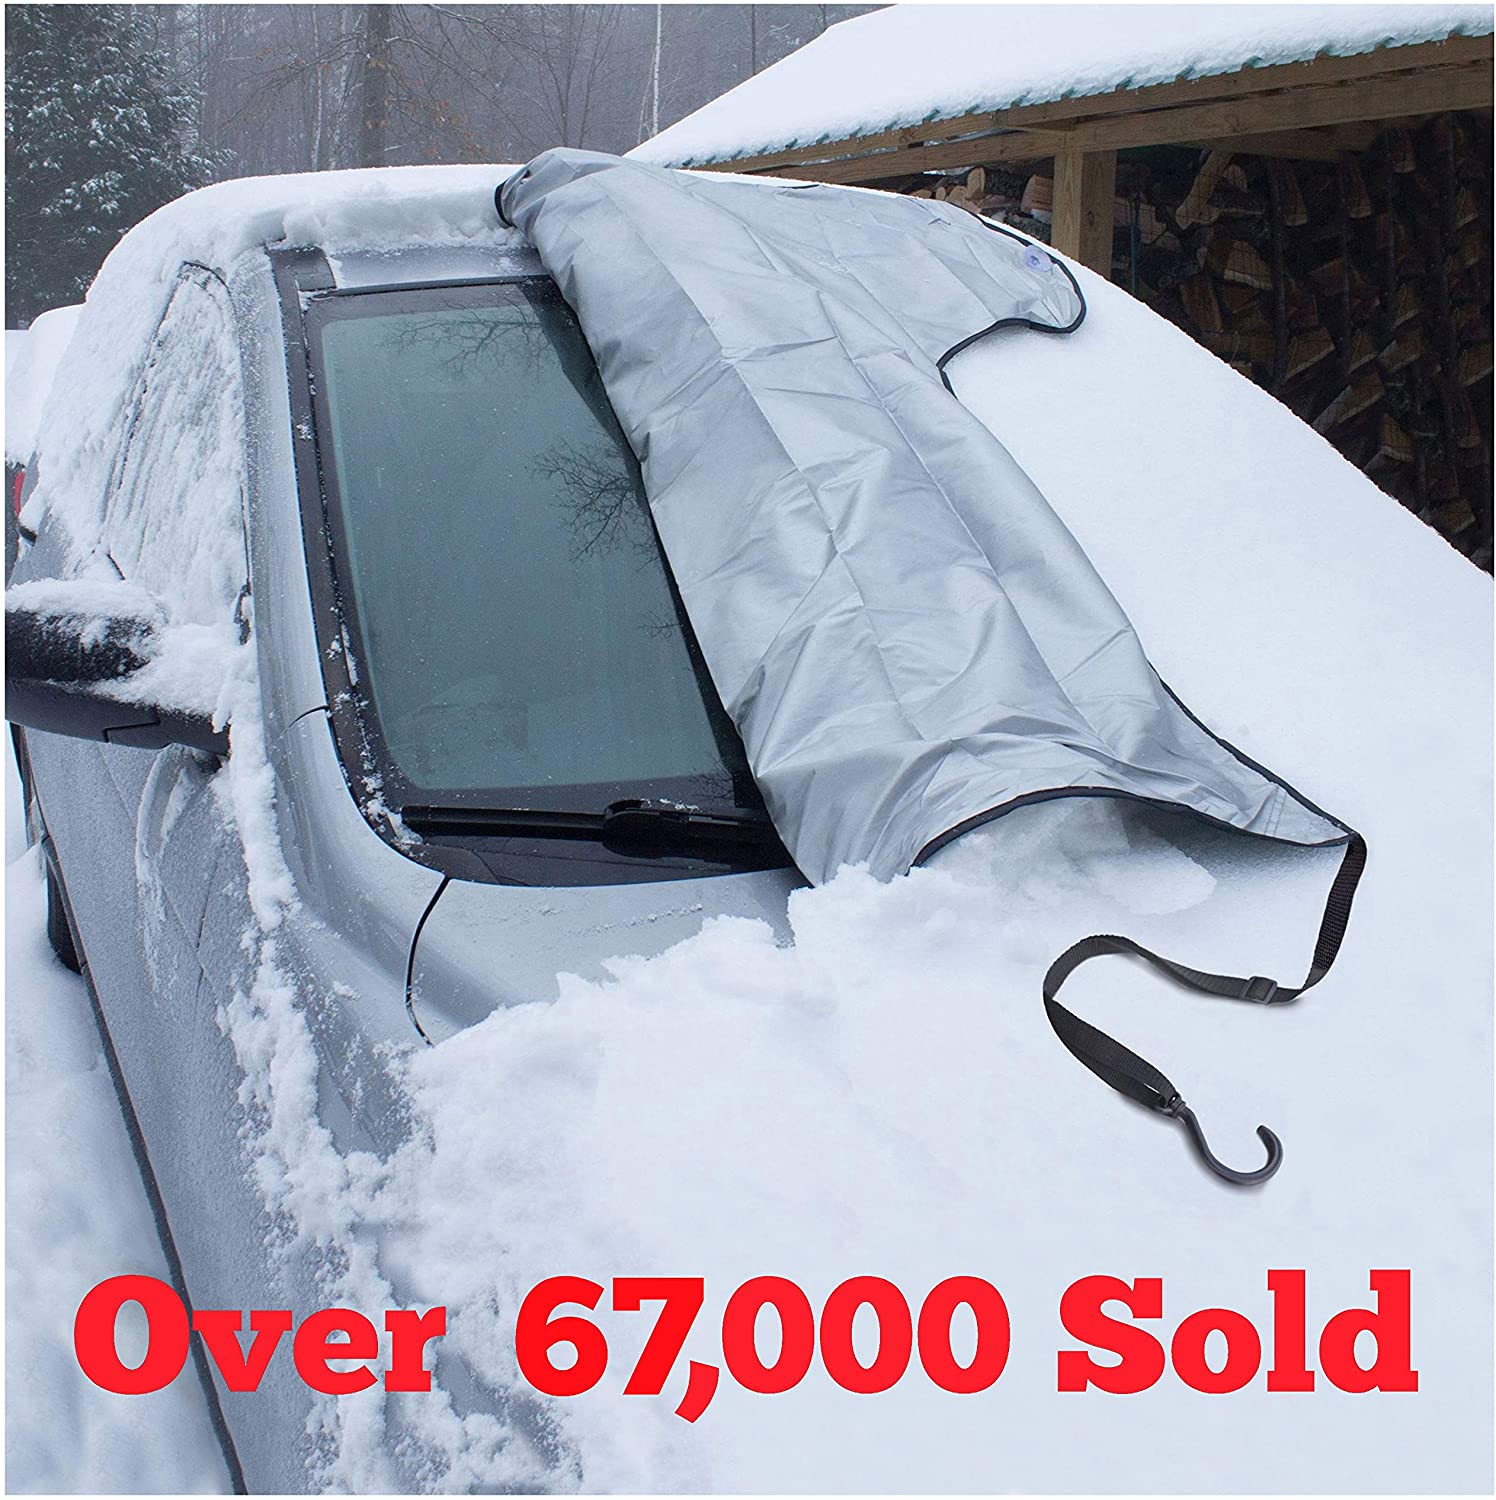 147CM x 116CM Windscreen Frost Cover Snow Cover Windshield Snow Cover with Ears Sun Dust Water Resistant Shade Protector Morning Time Saver for Cars SUV in all Weather BACKTURE Car Snow Cover 